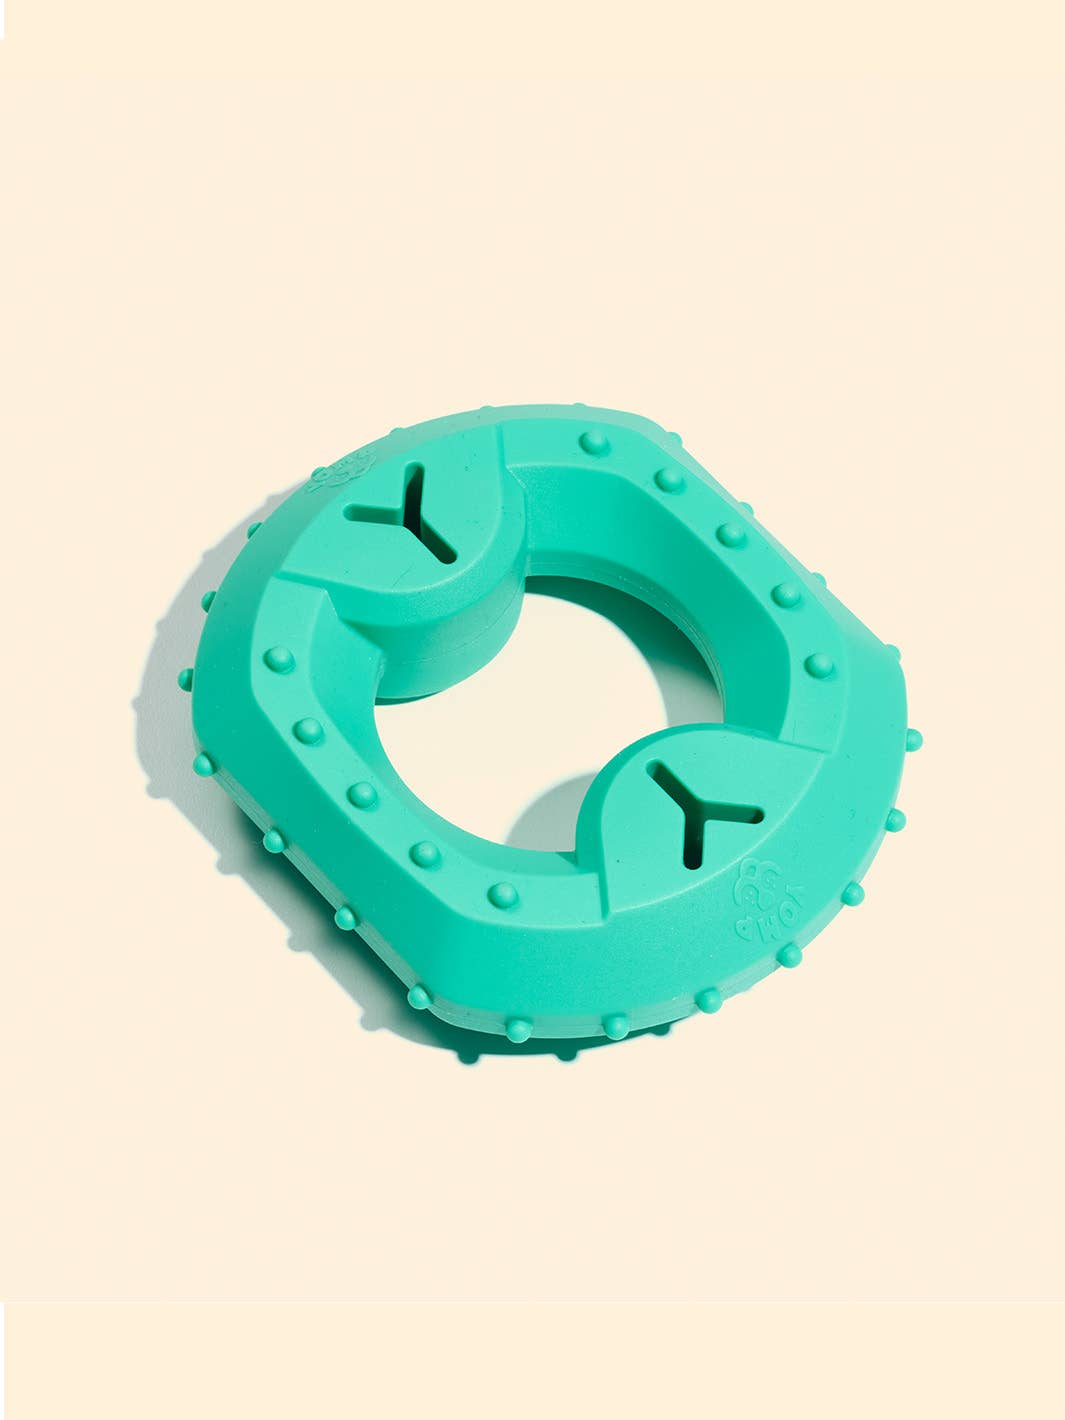 Yomp ChillChew: Ring Shaped Teether Toy for Dogs